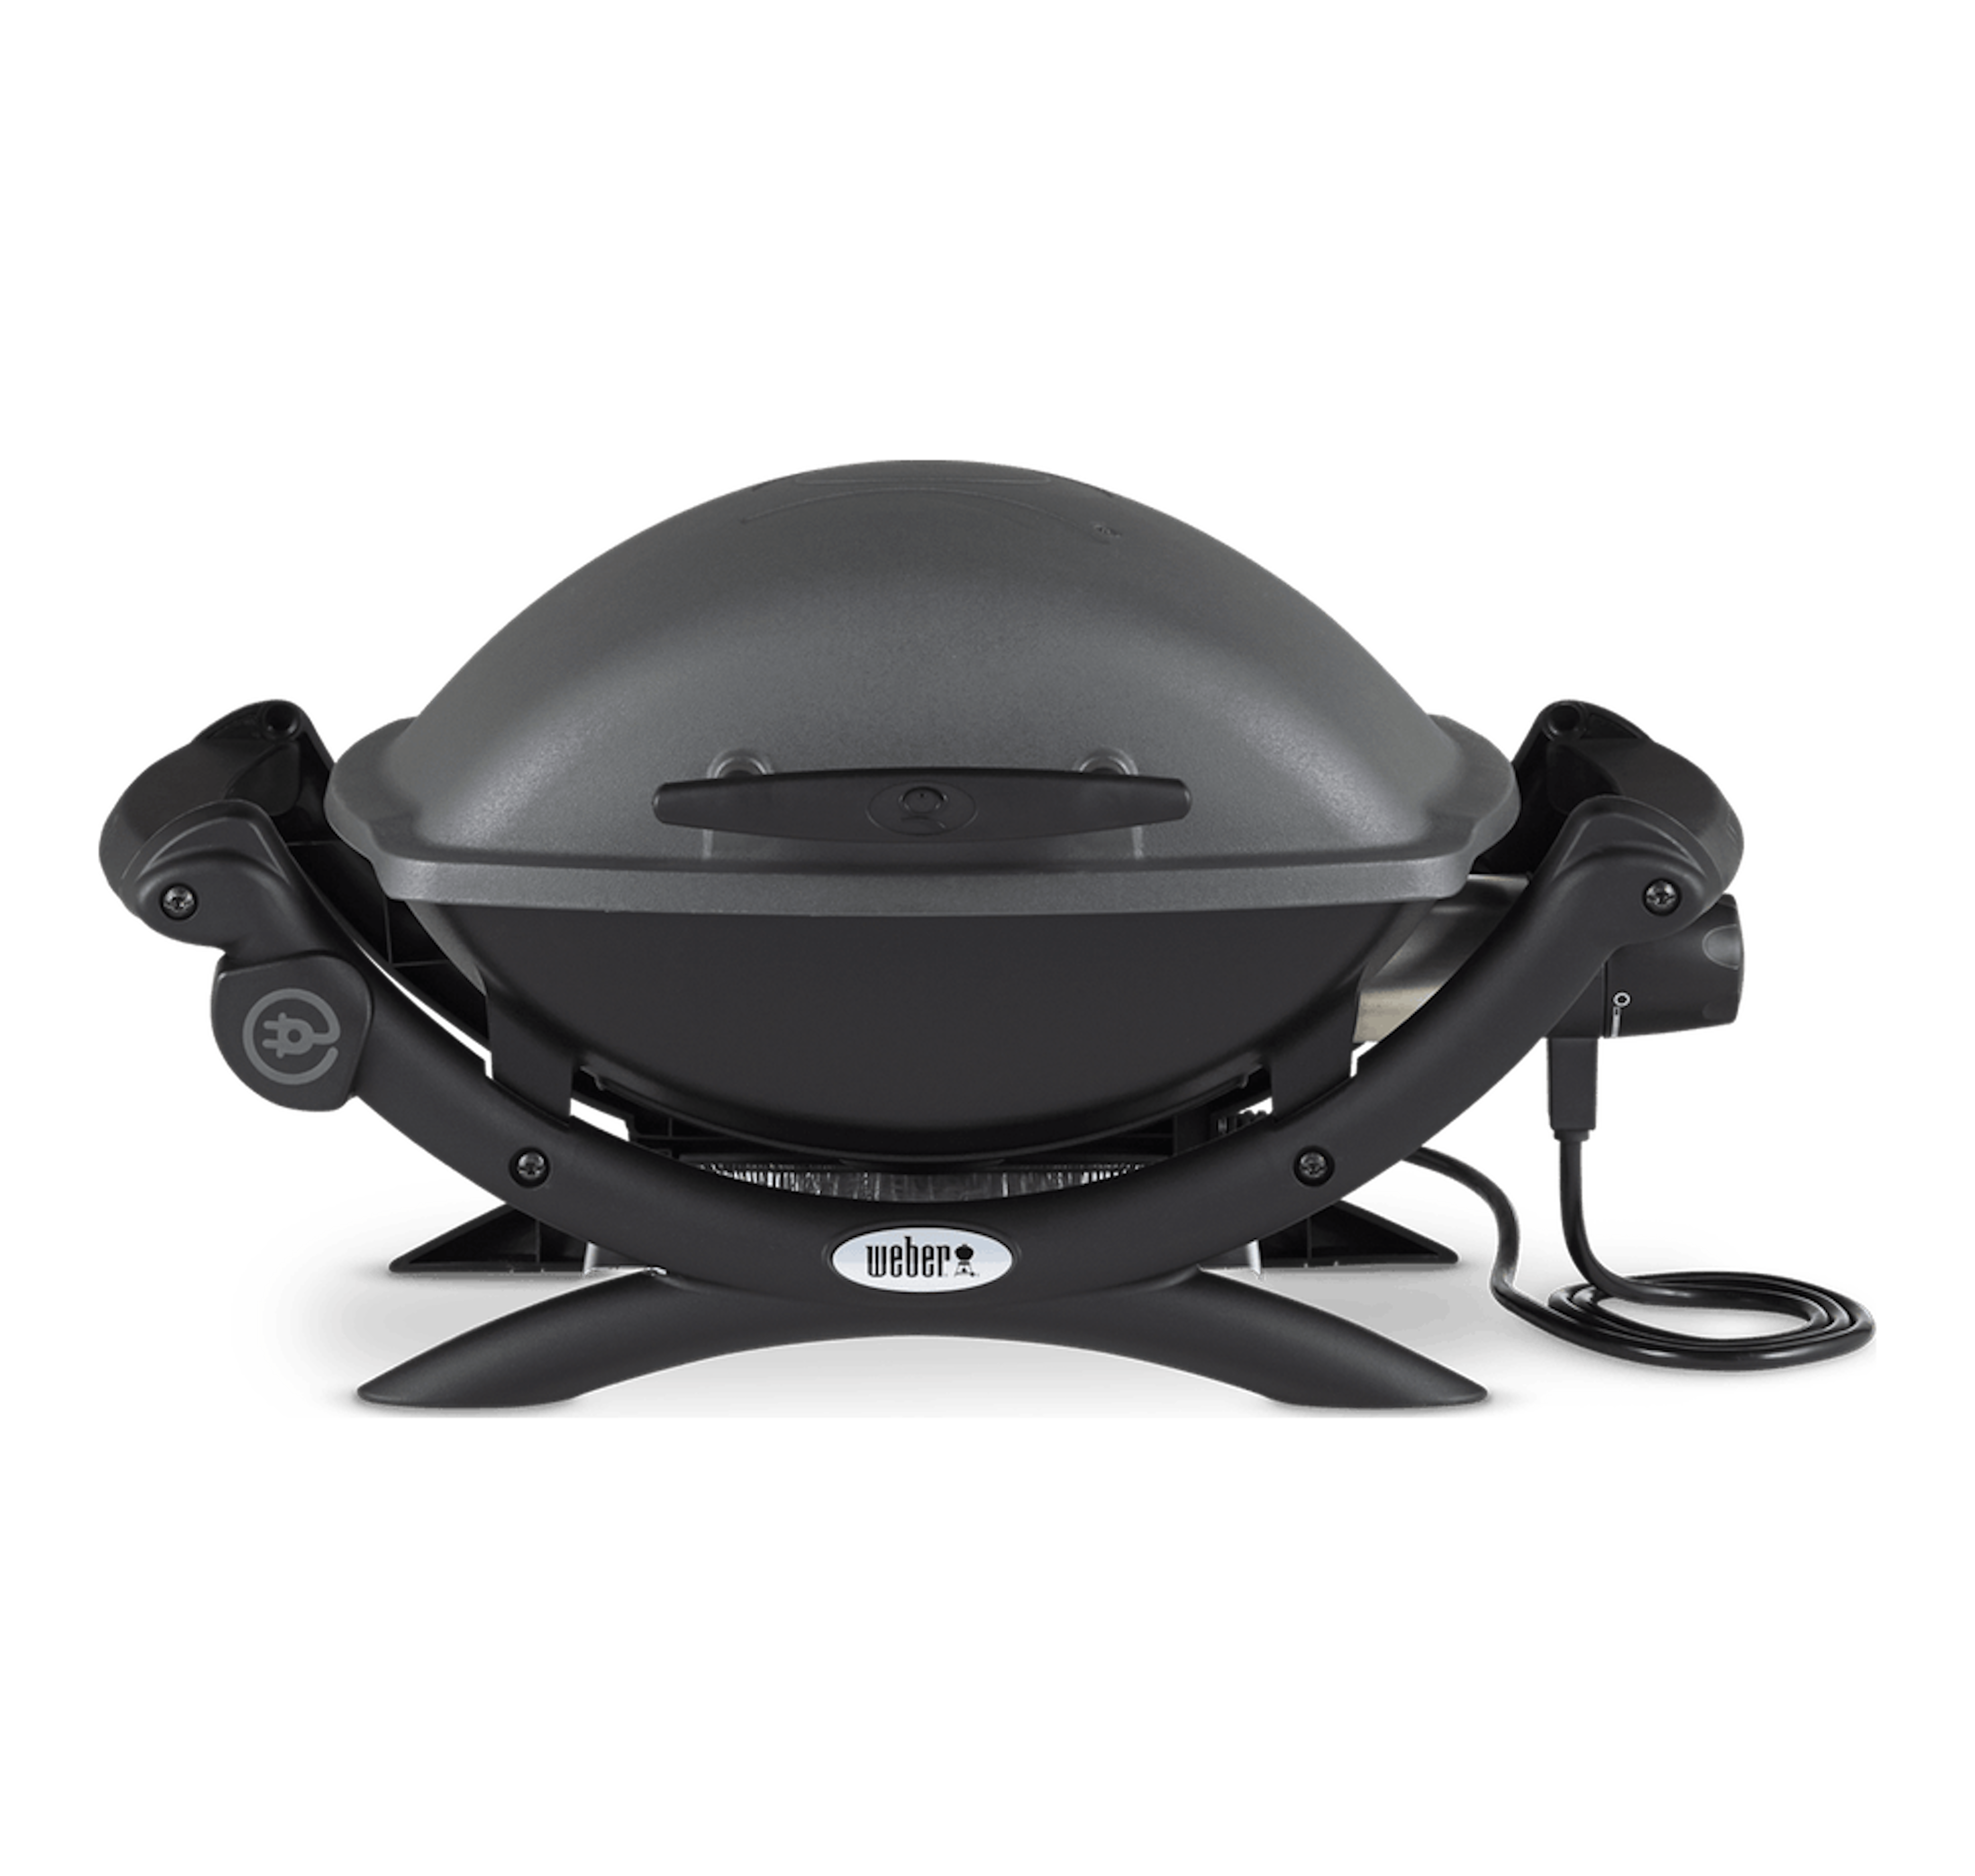 Buy Weber Q 1400 Grill - 52020001 | Embers